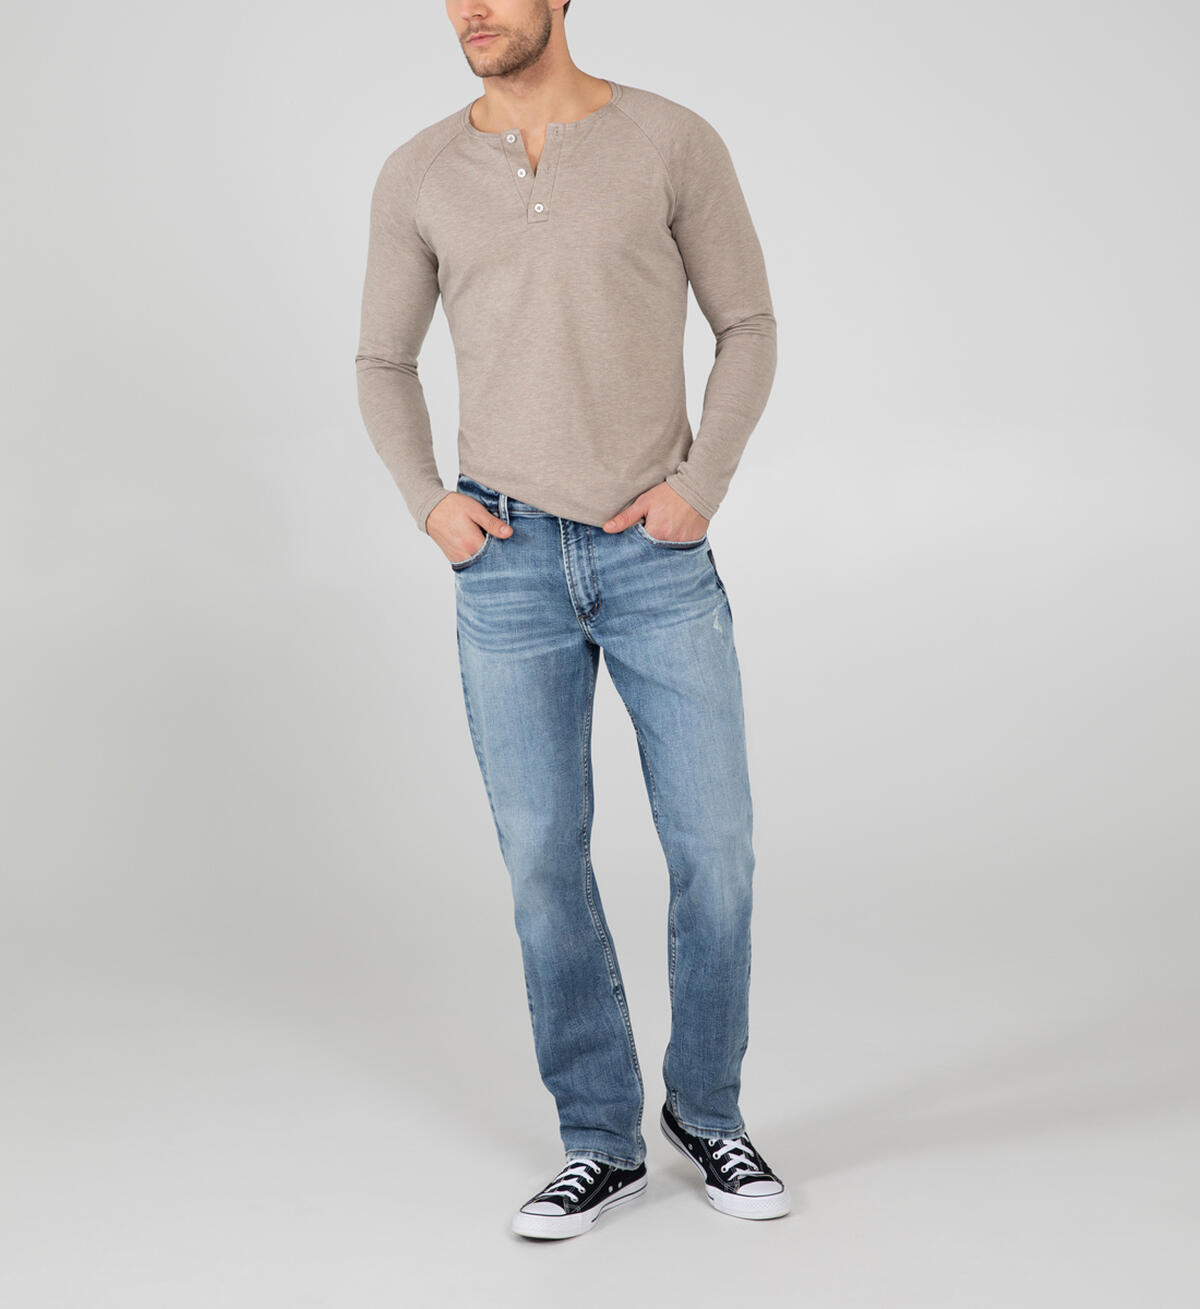 Machray Classic Fit Straight Leg Jeans, , hi-res image number 0